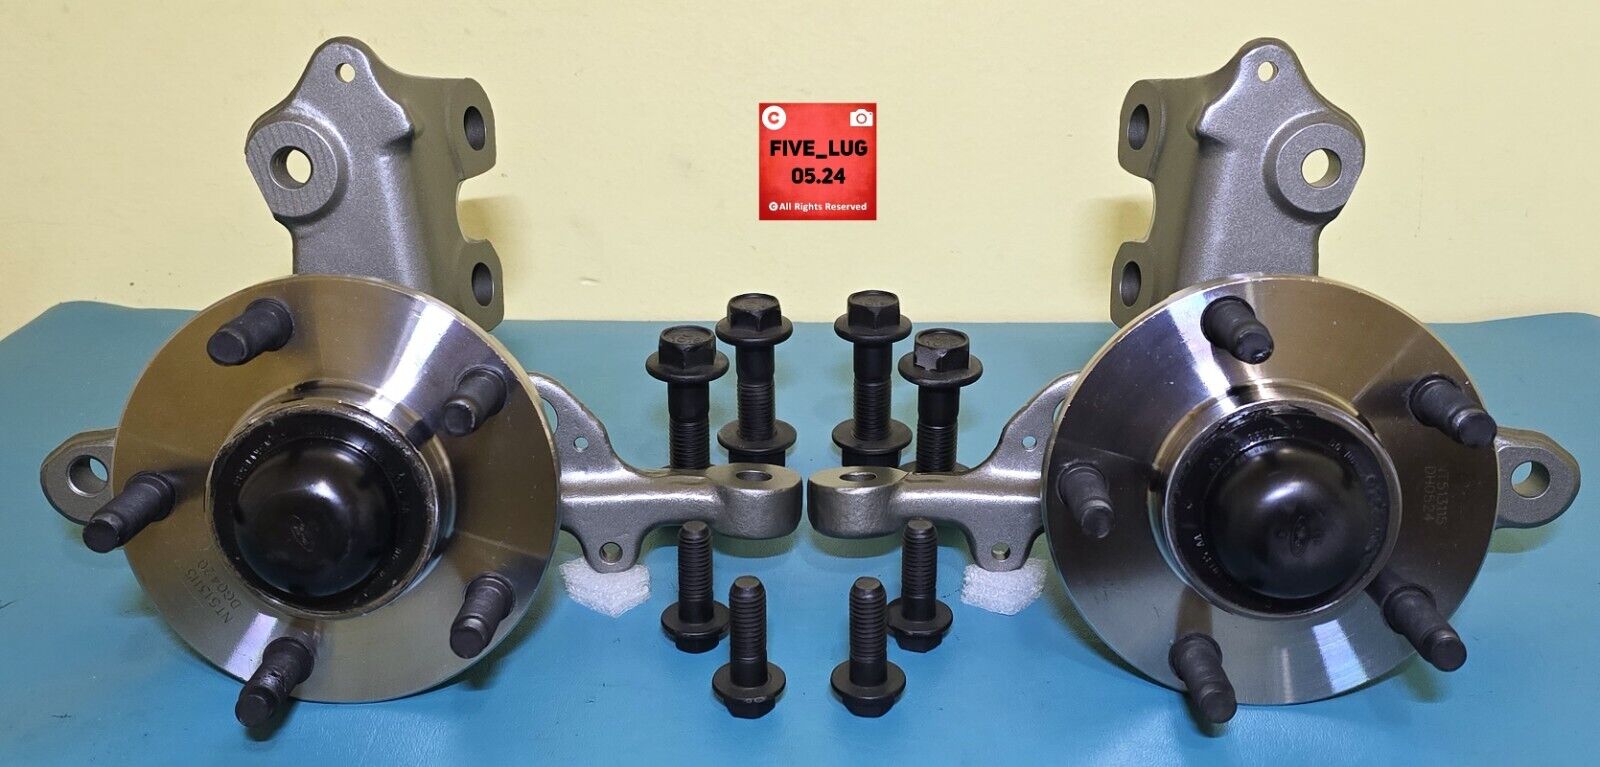 1996-2004/96-04 SN95-Ford Mustang Spindles, New Nuts & Hubs MOUNTED & TORQUED